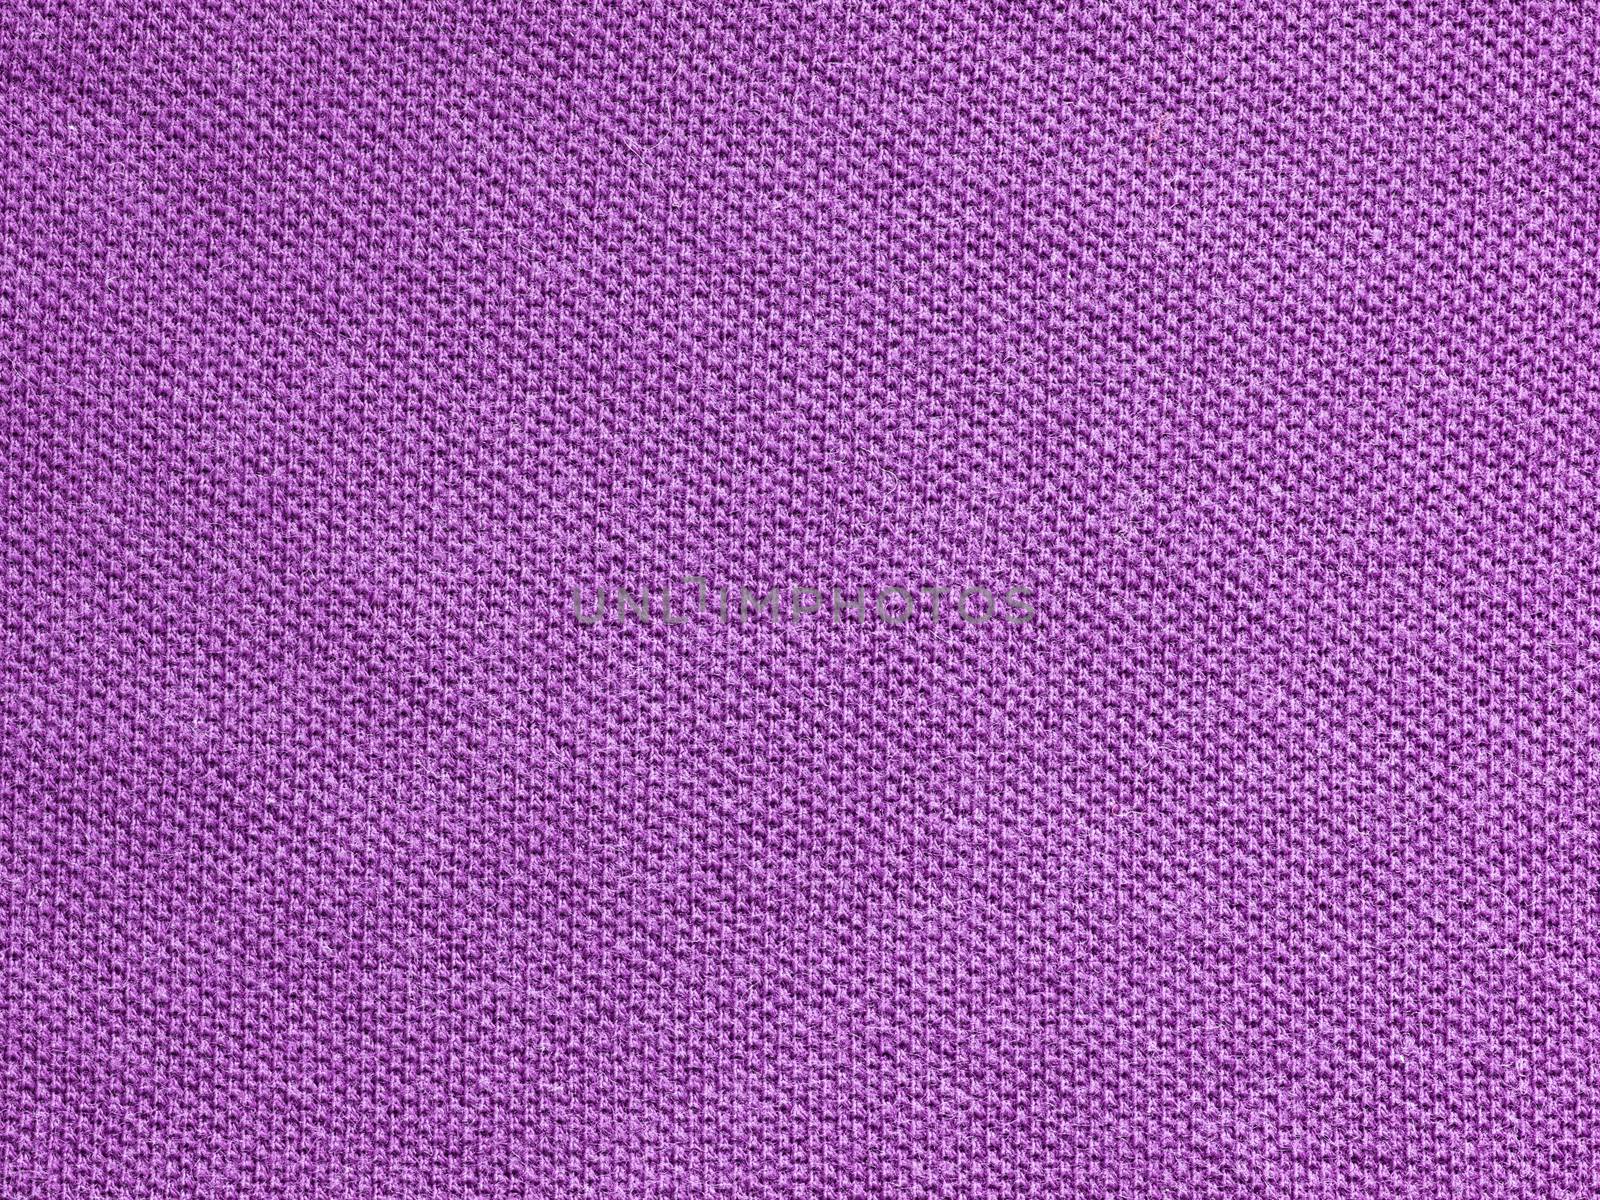 purple knitted Jersey polo texture as textile background